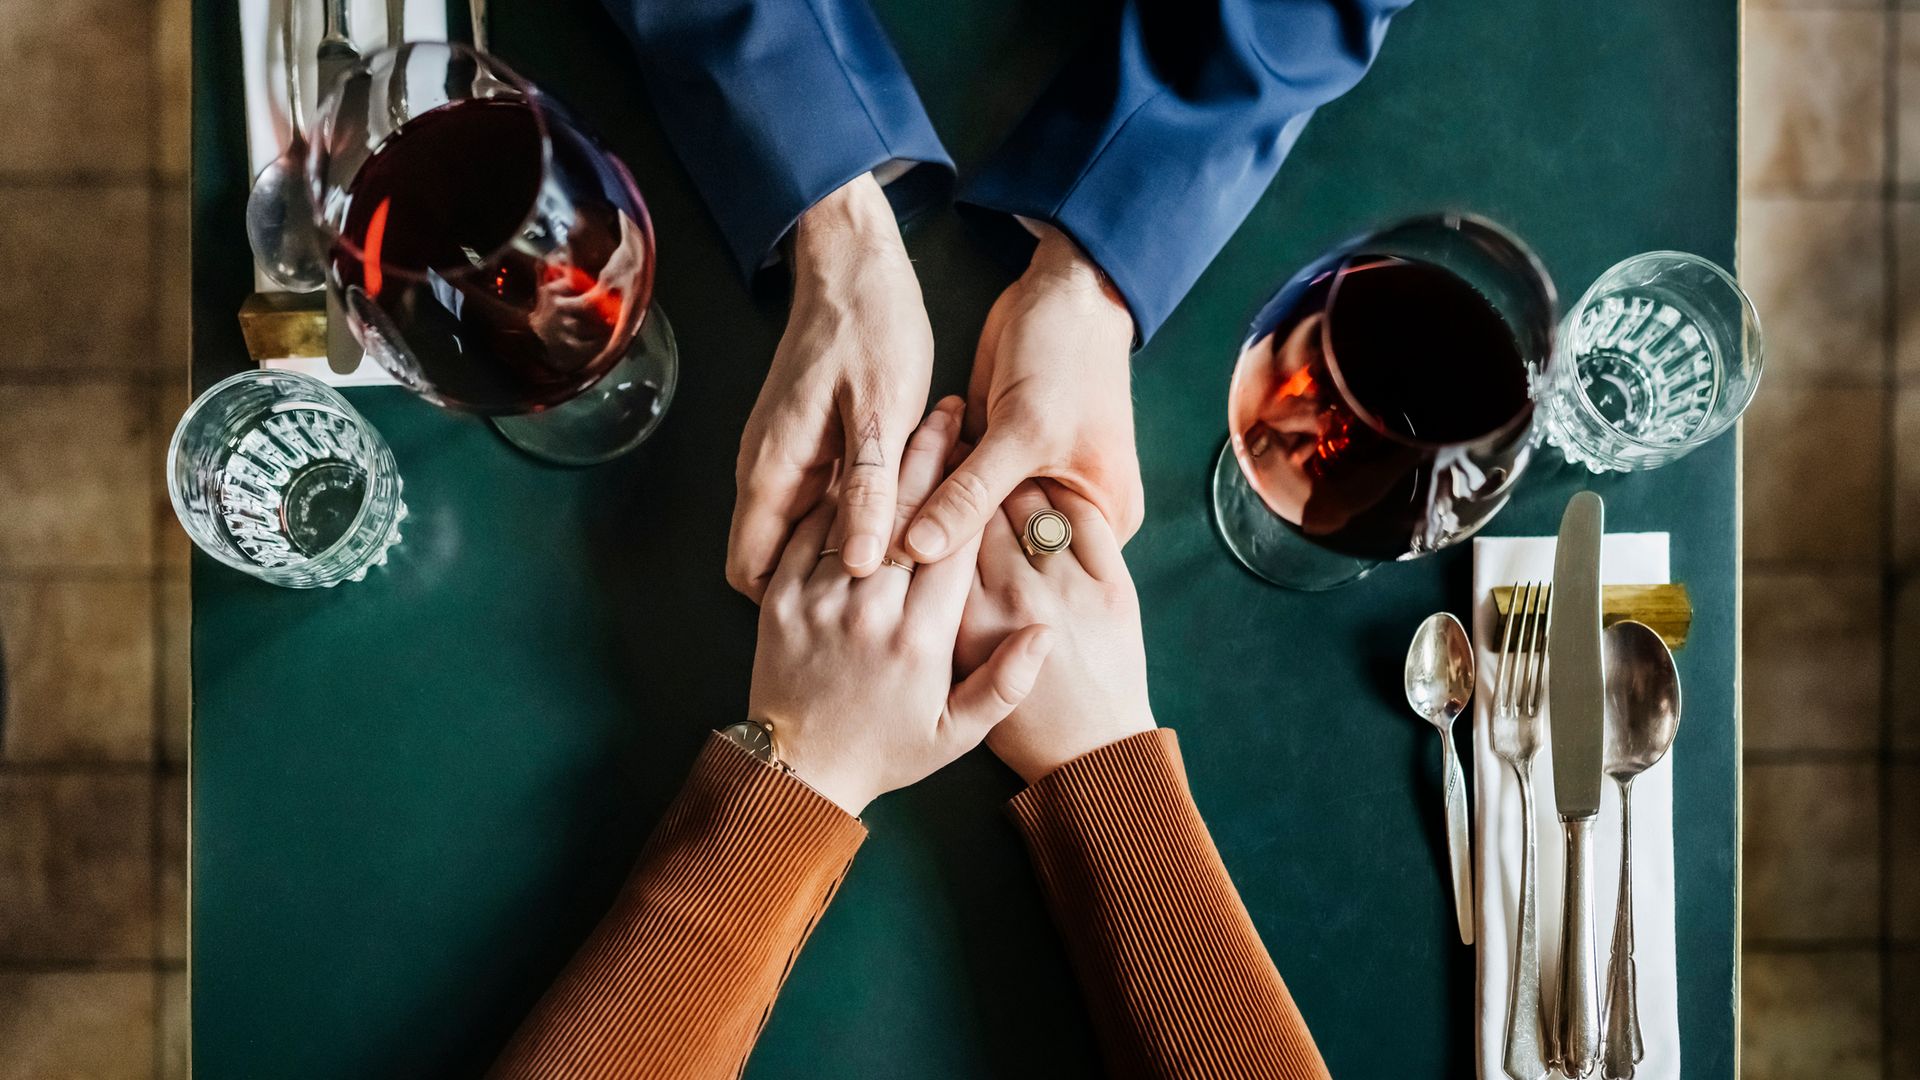 An aerial view of a couple holding hands and drinking red wine while sitting at a restaurant table for lunch together.